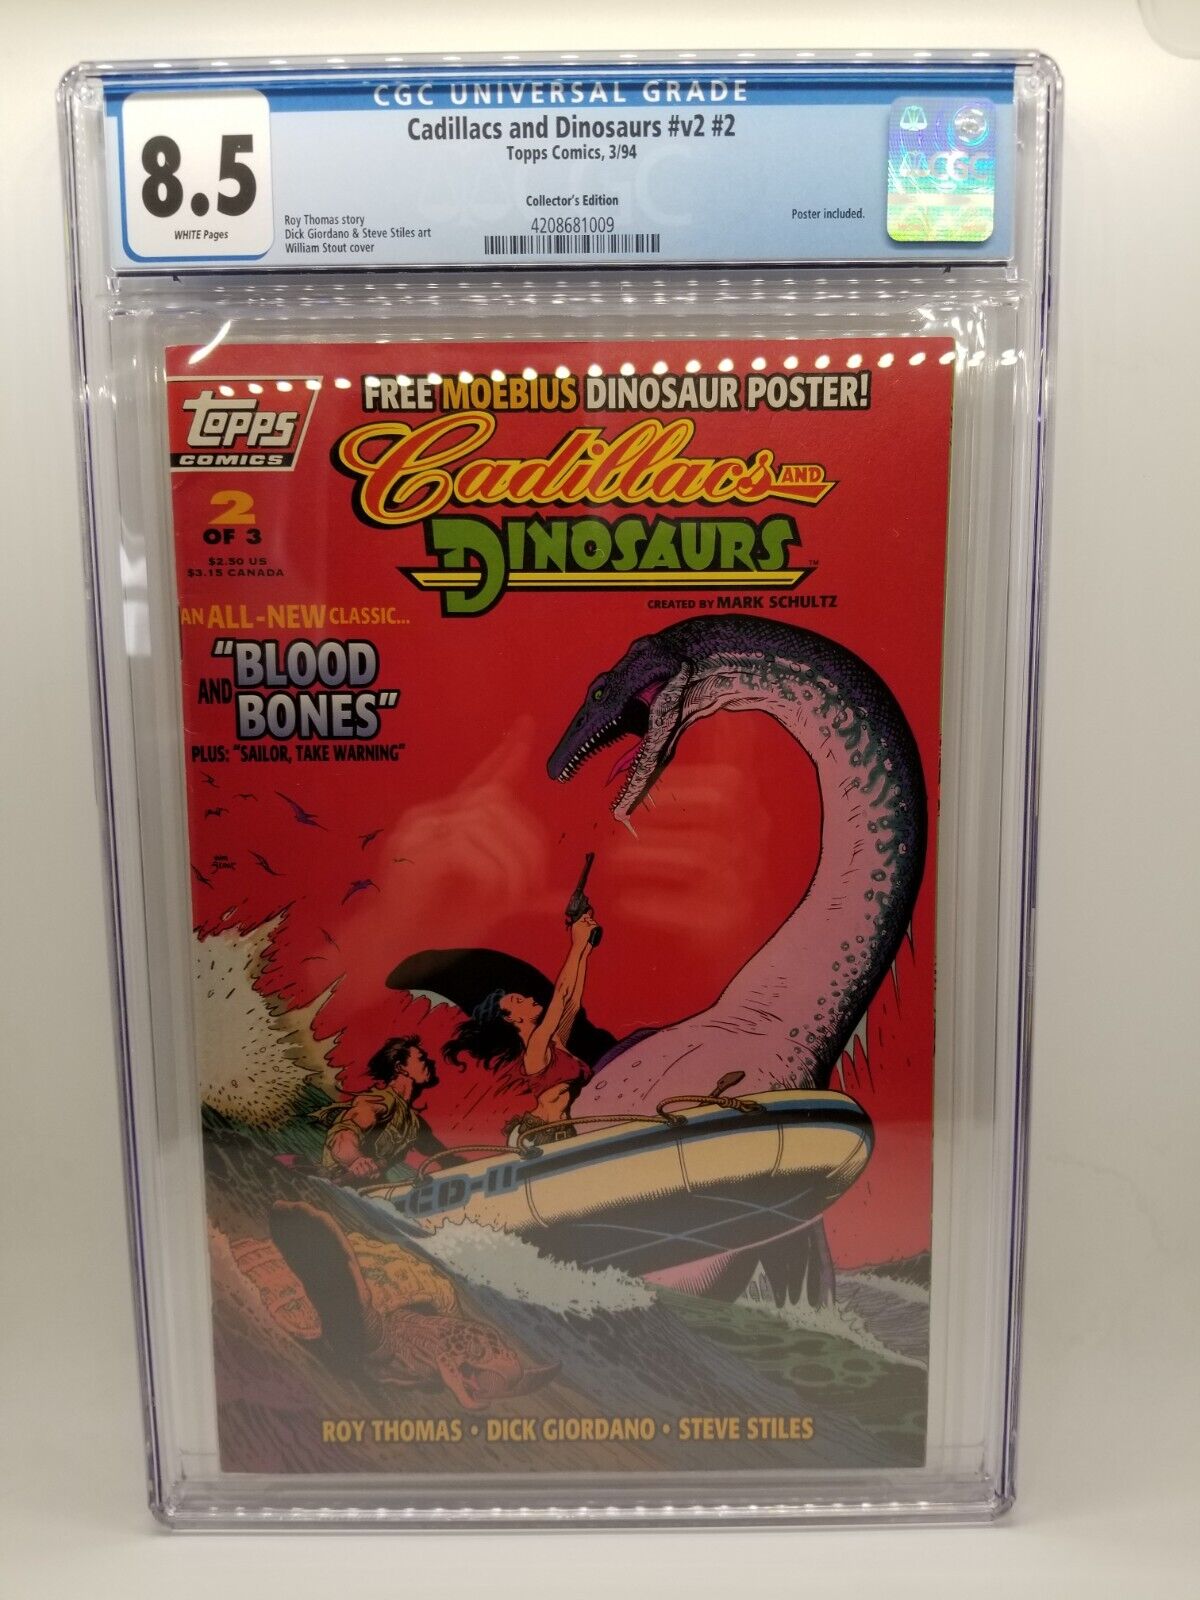 Cadillacs and Dinosaurs v2 #2 Collector's Edition CGC 8.5 Topps Comic